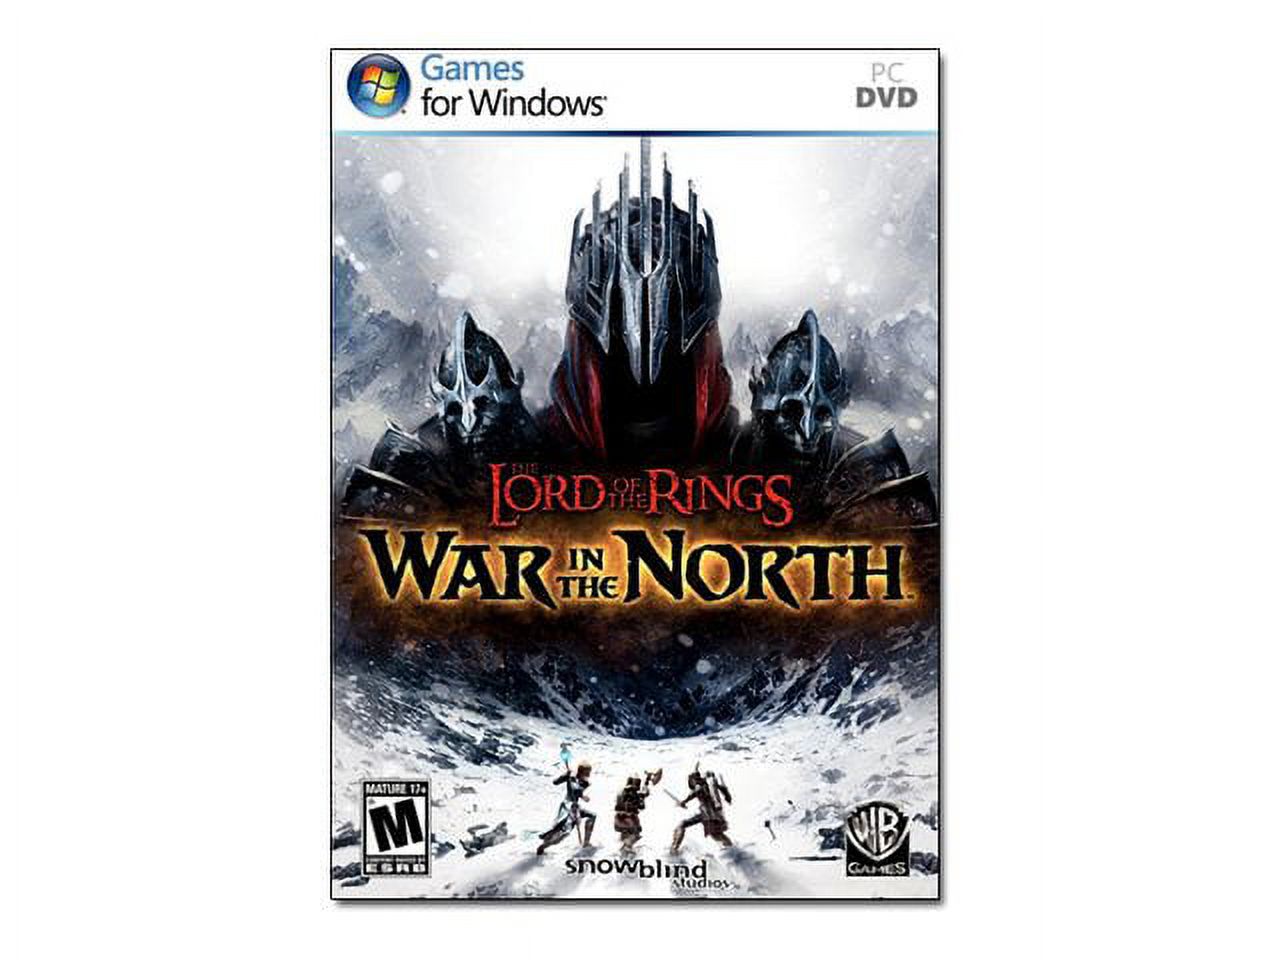 The Lord of the Rings War In the North - Win - DVD - image 1 of 4